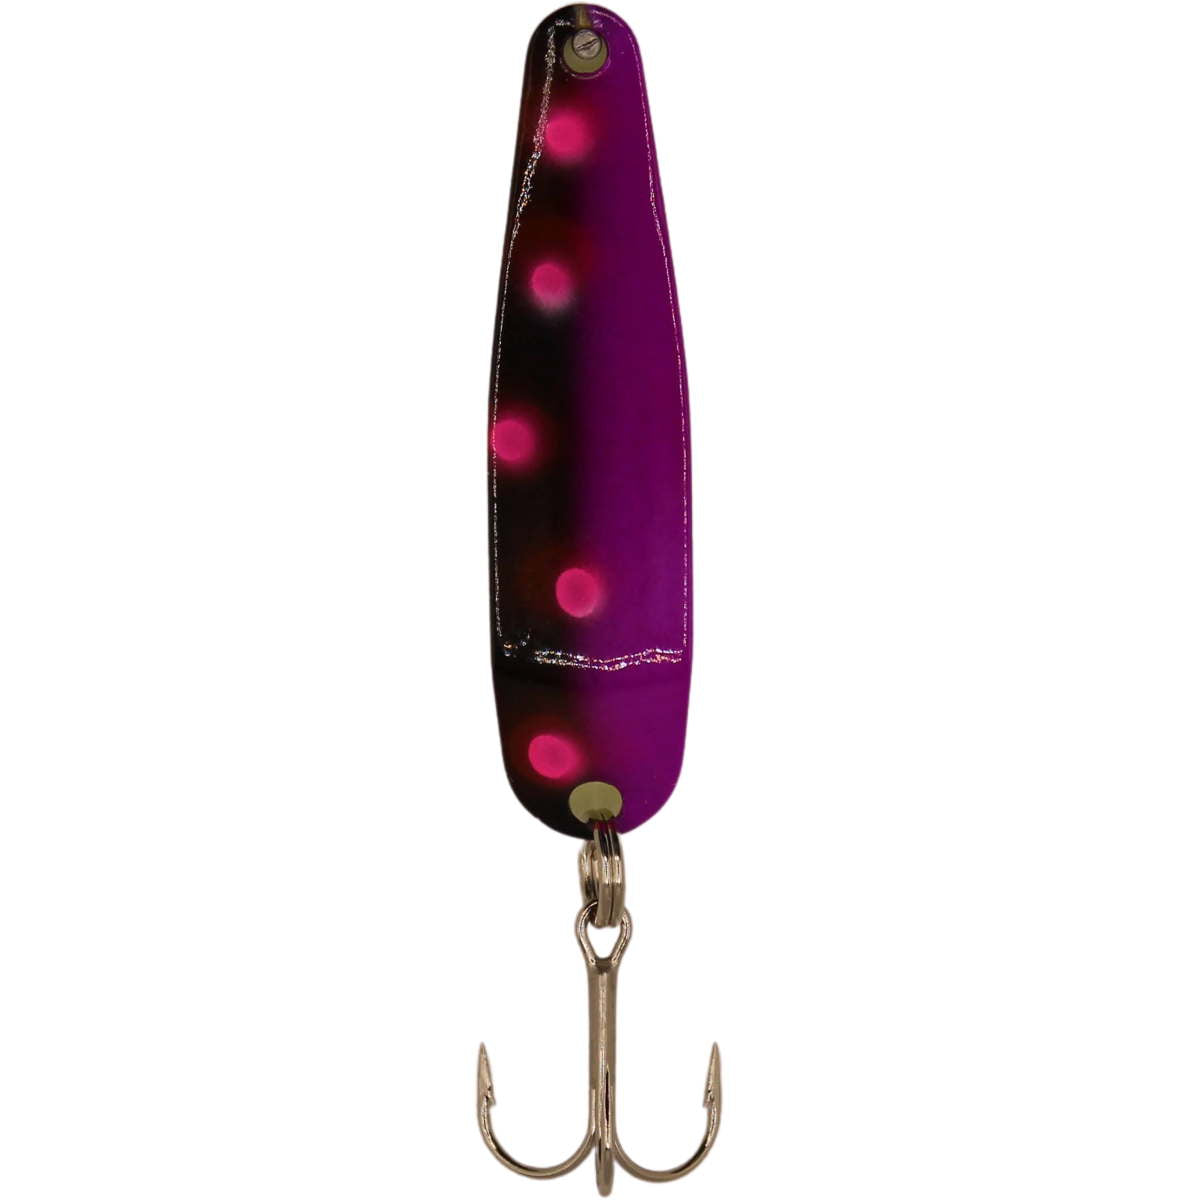 Photo of Advance Tackle Michigan Stinger Scorpion Spoon for sale at United Tackle Shops